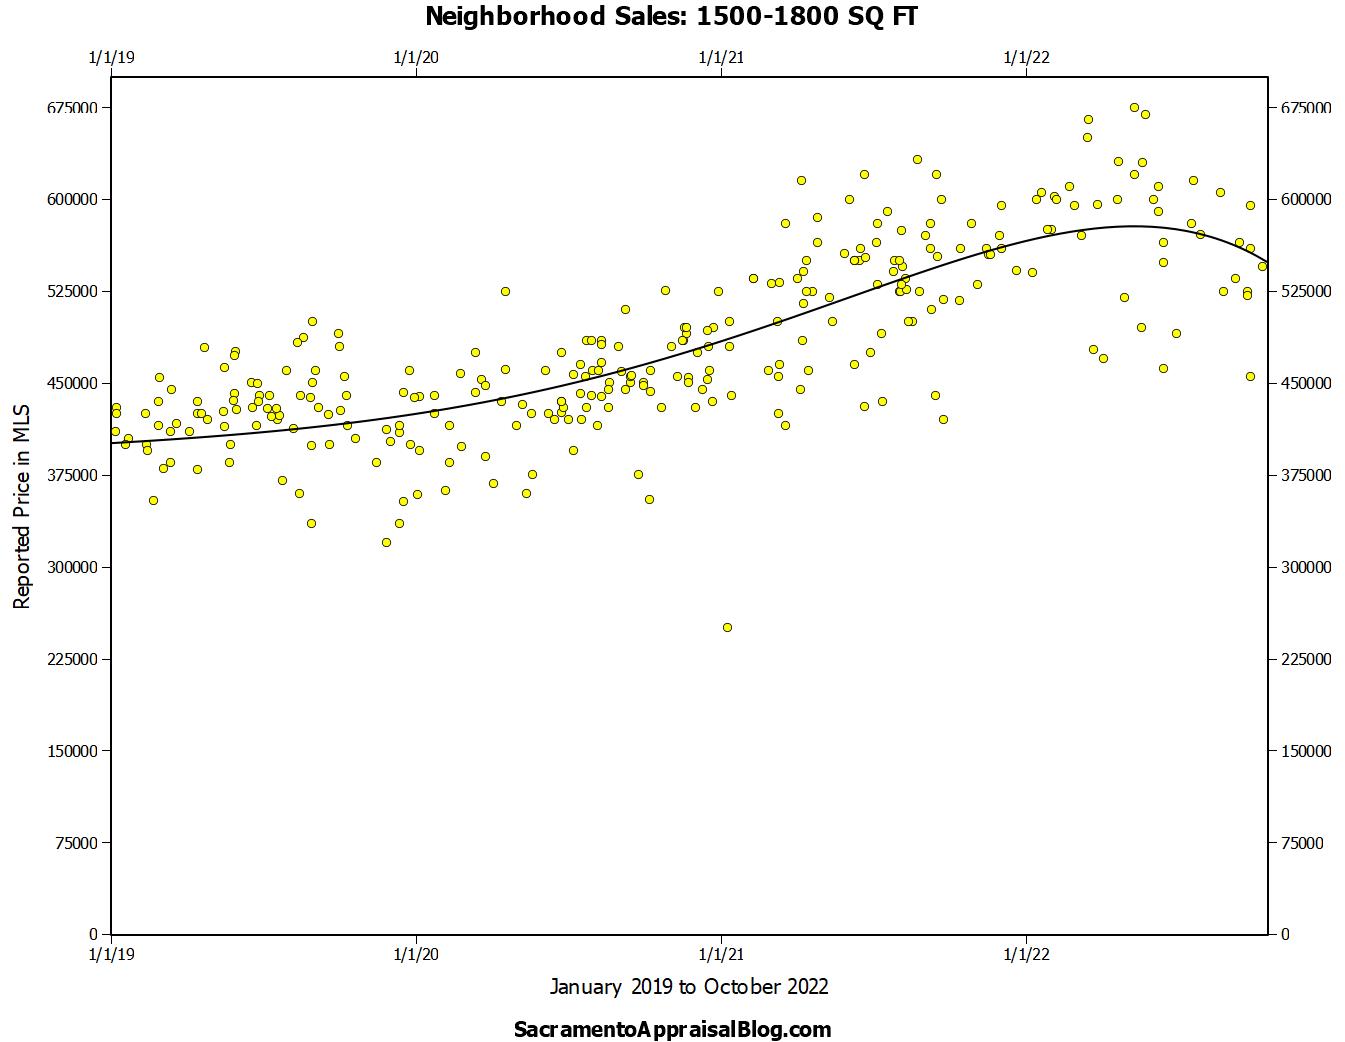 A neighborhood in Roseville to show a declining trend with a scatter graph